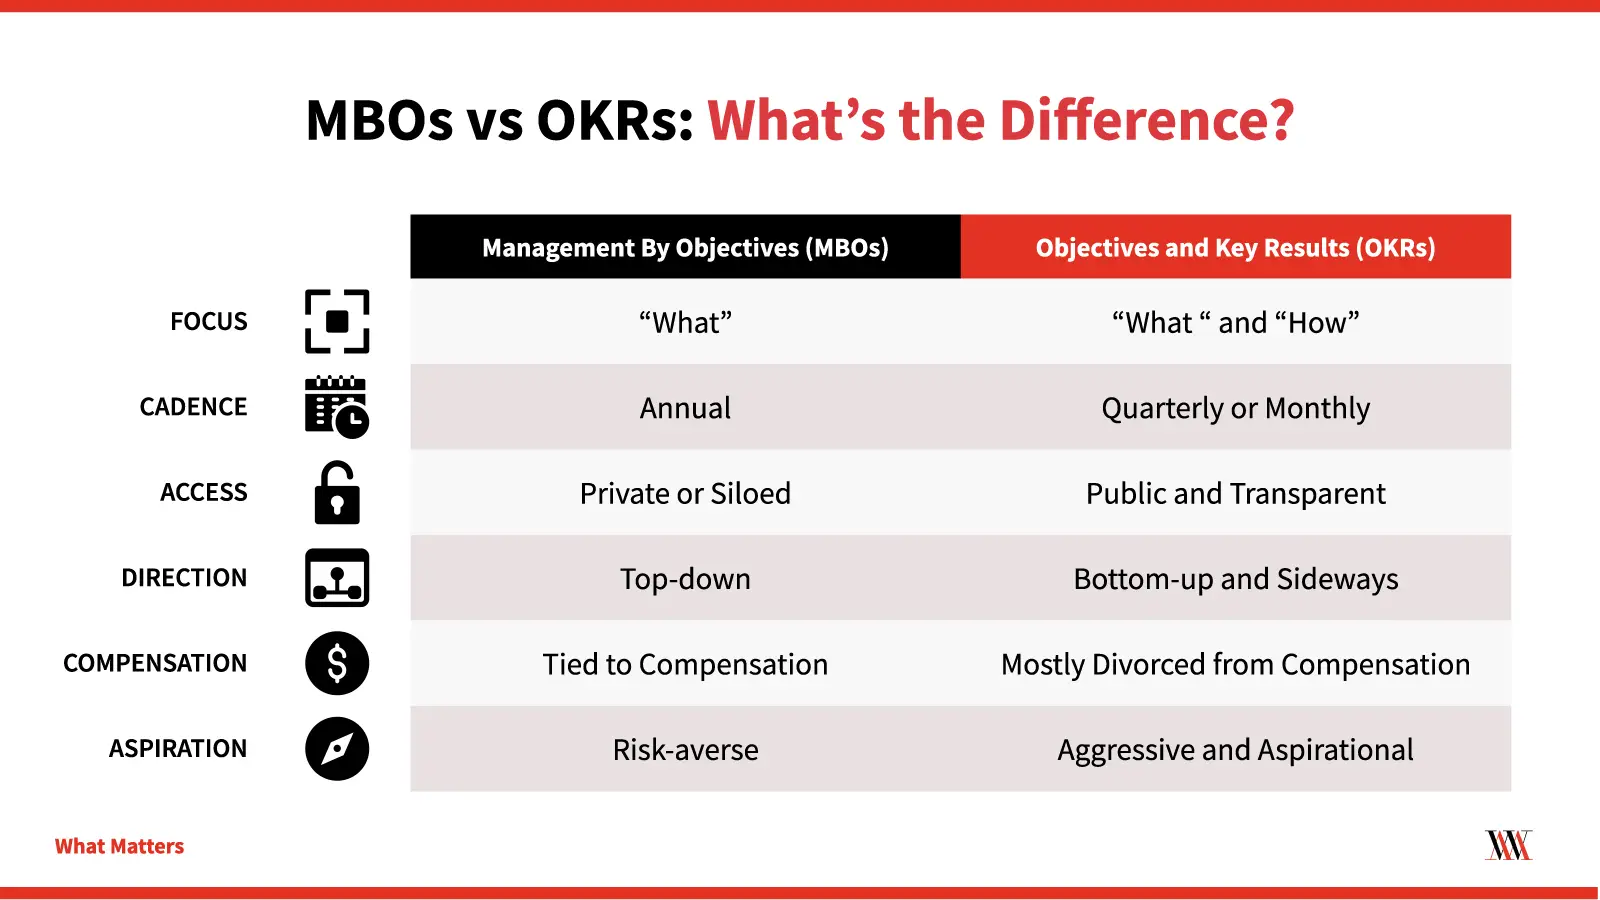 MBOs vs OKRs: What's the difference?